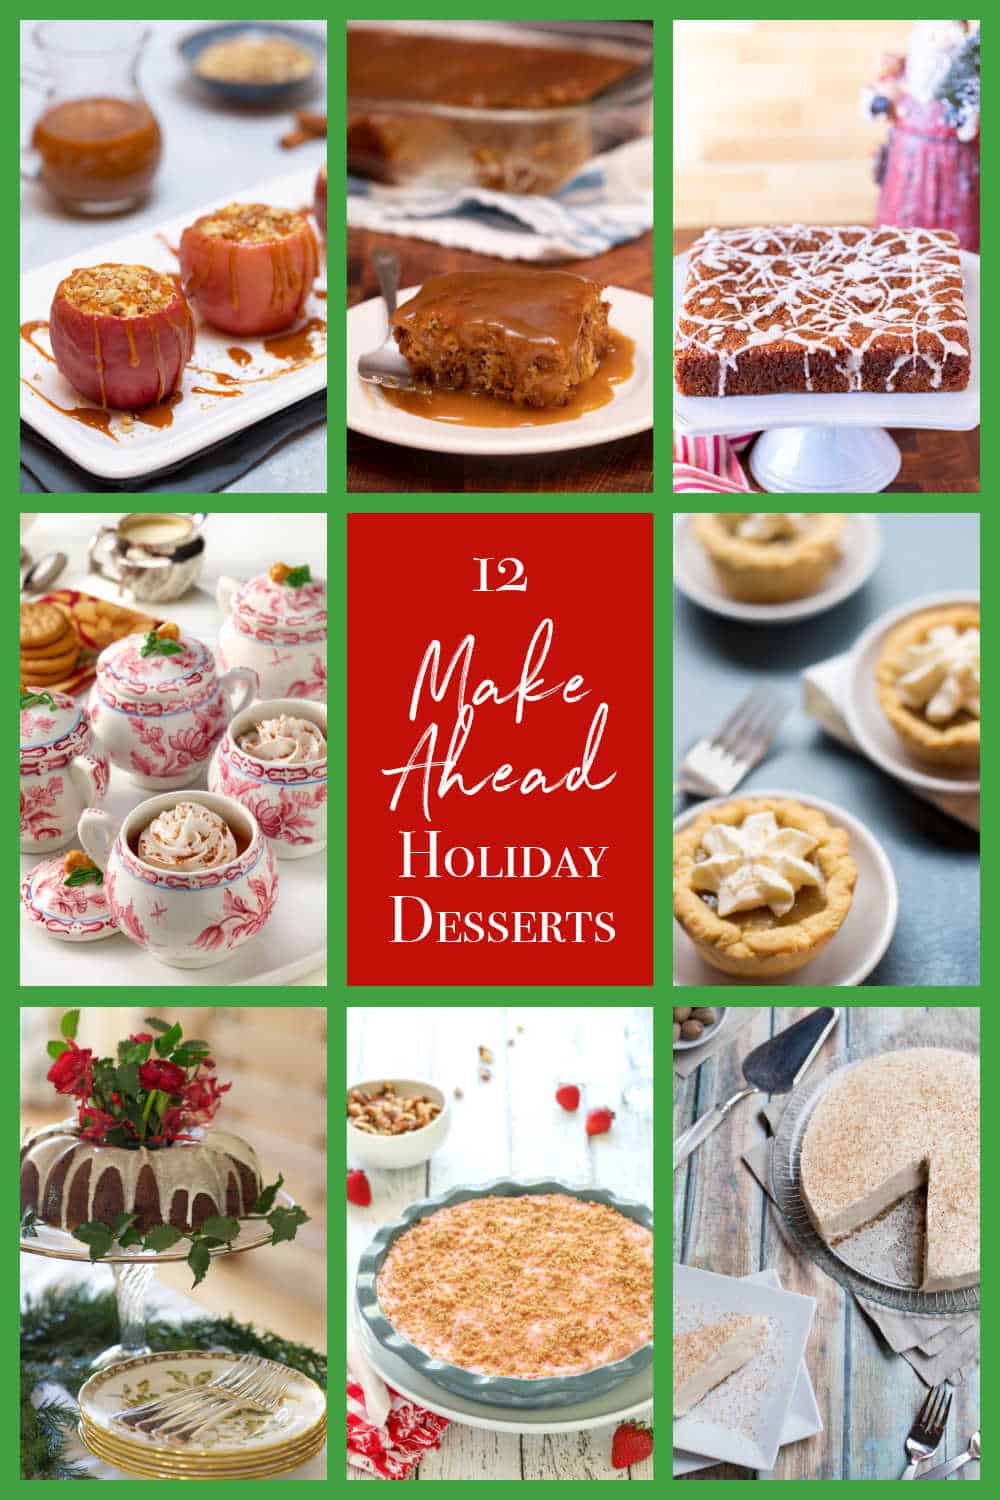 Five Make Ahead Holiday Desserts | A Well-Seasoned Kitchen®